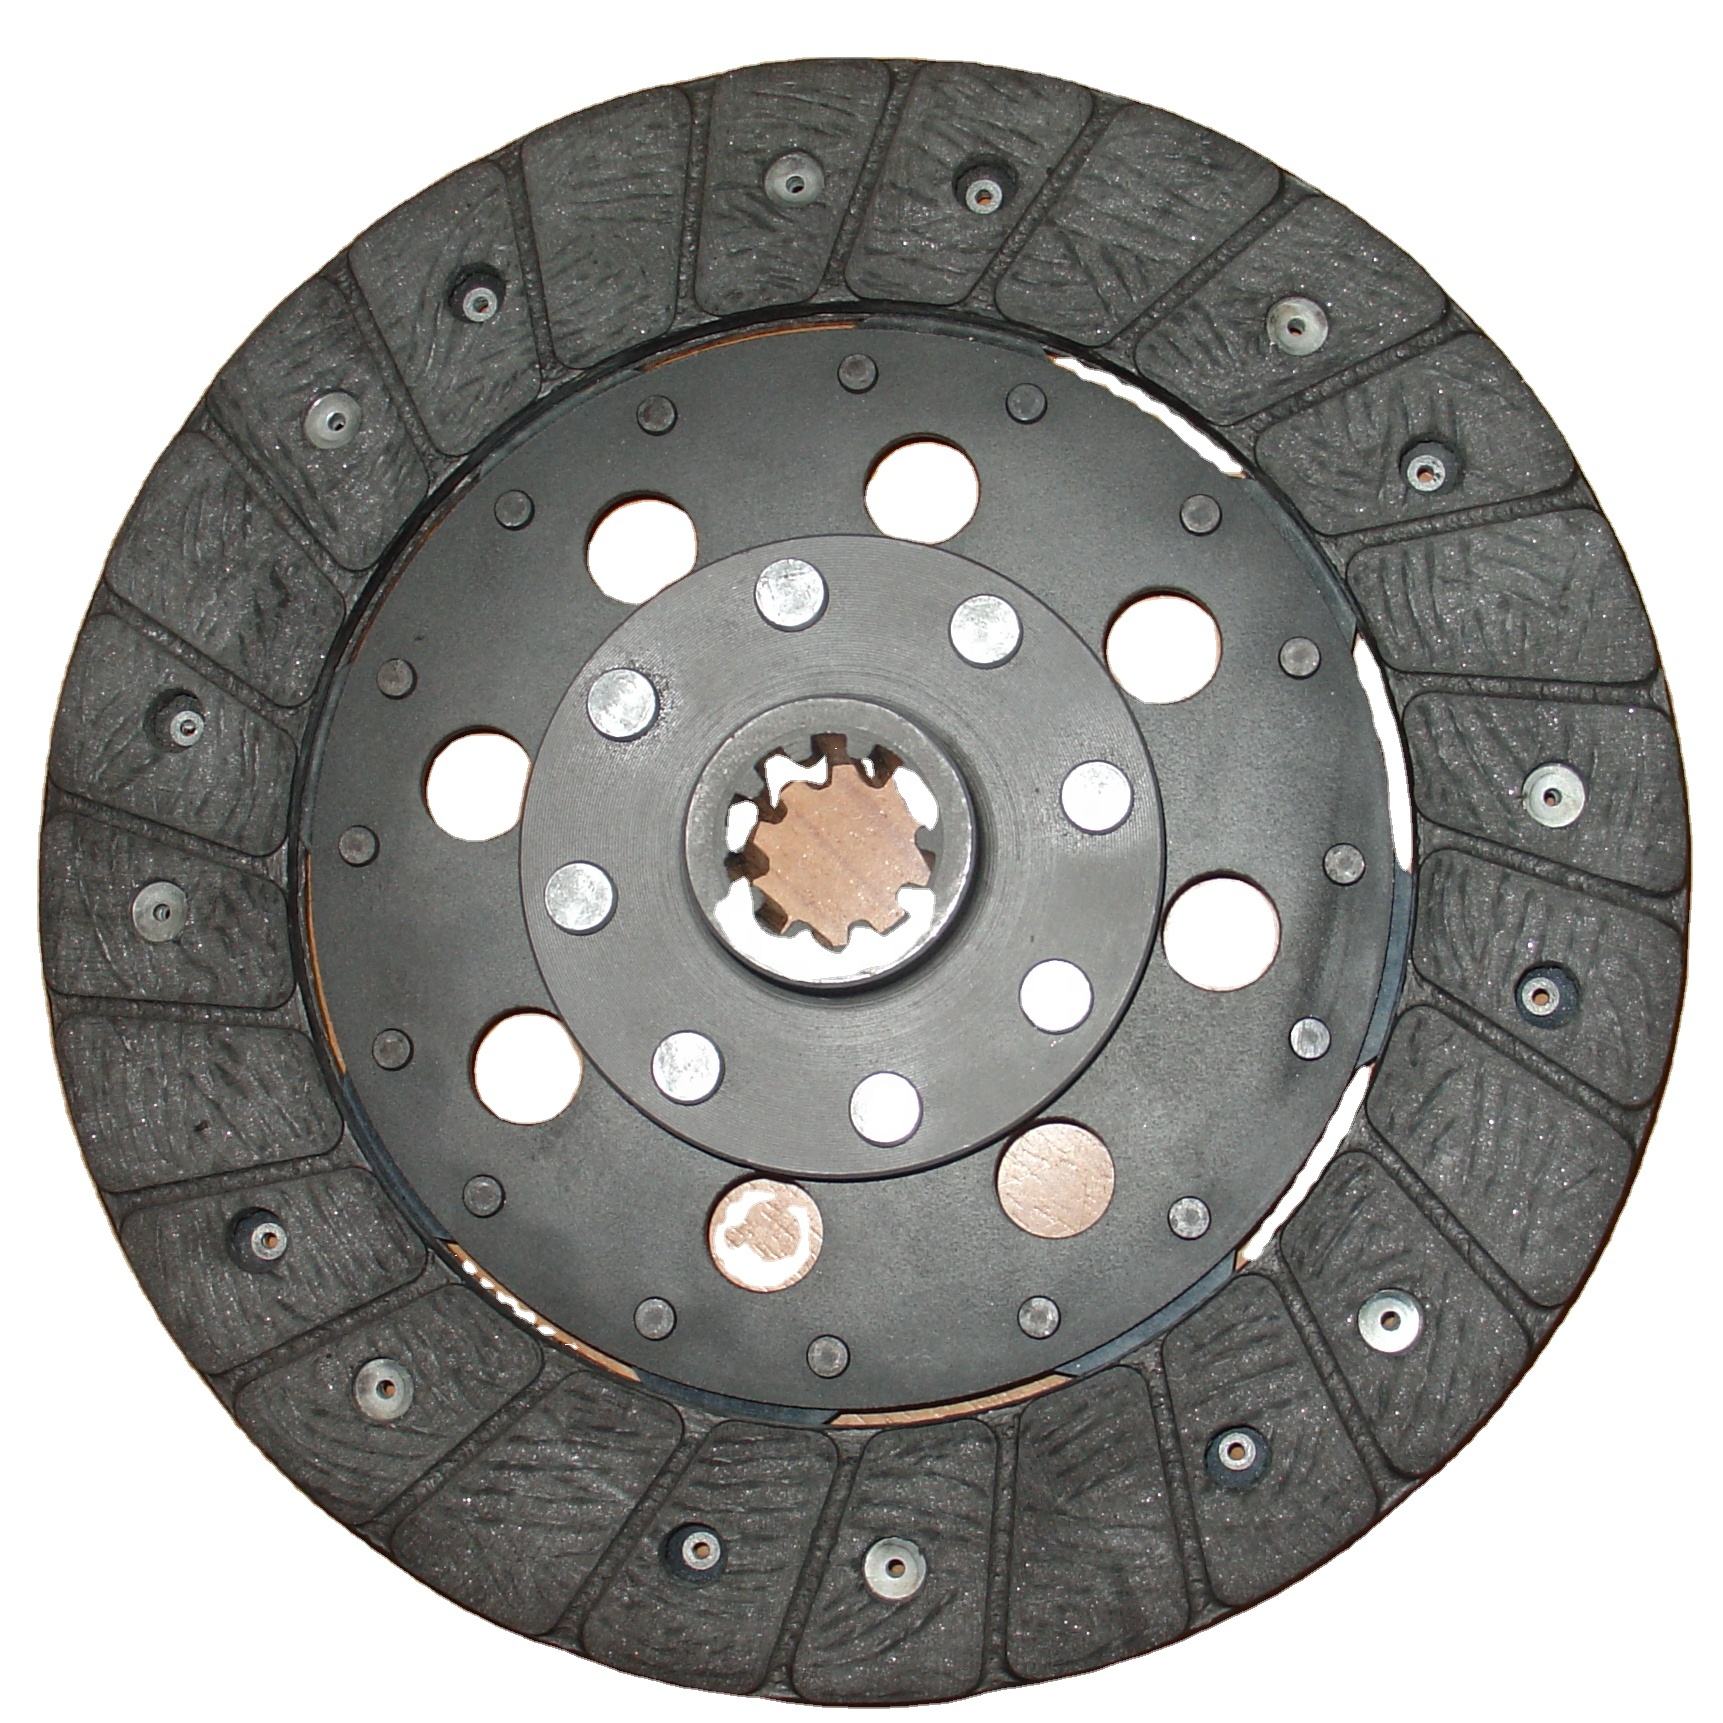 Tractor clutch disc 887900M91 for Massey Ferguson PTO Clutch Plate